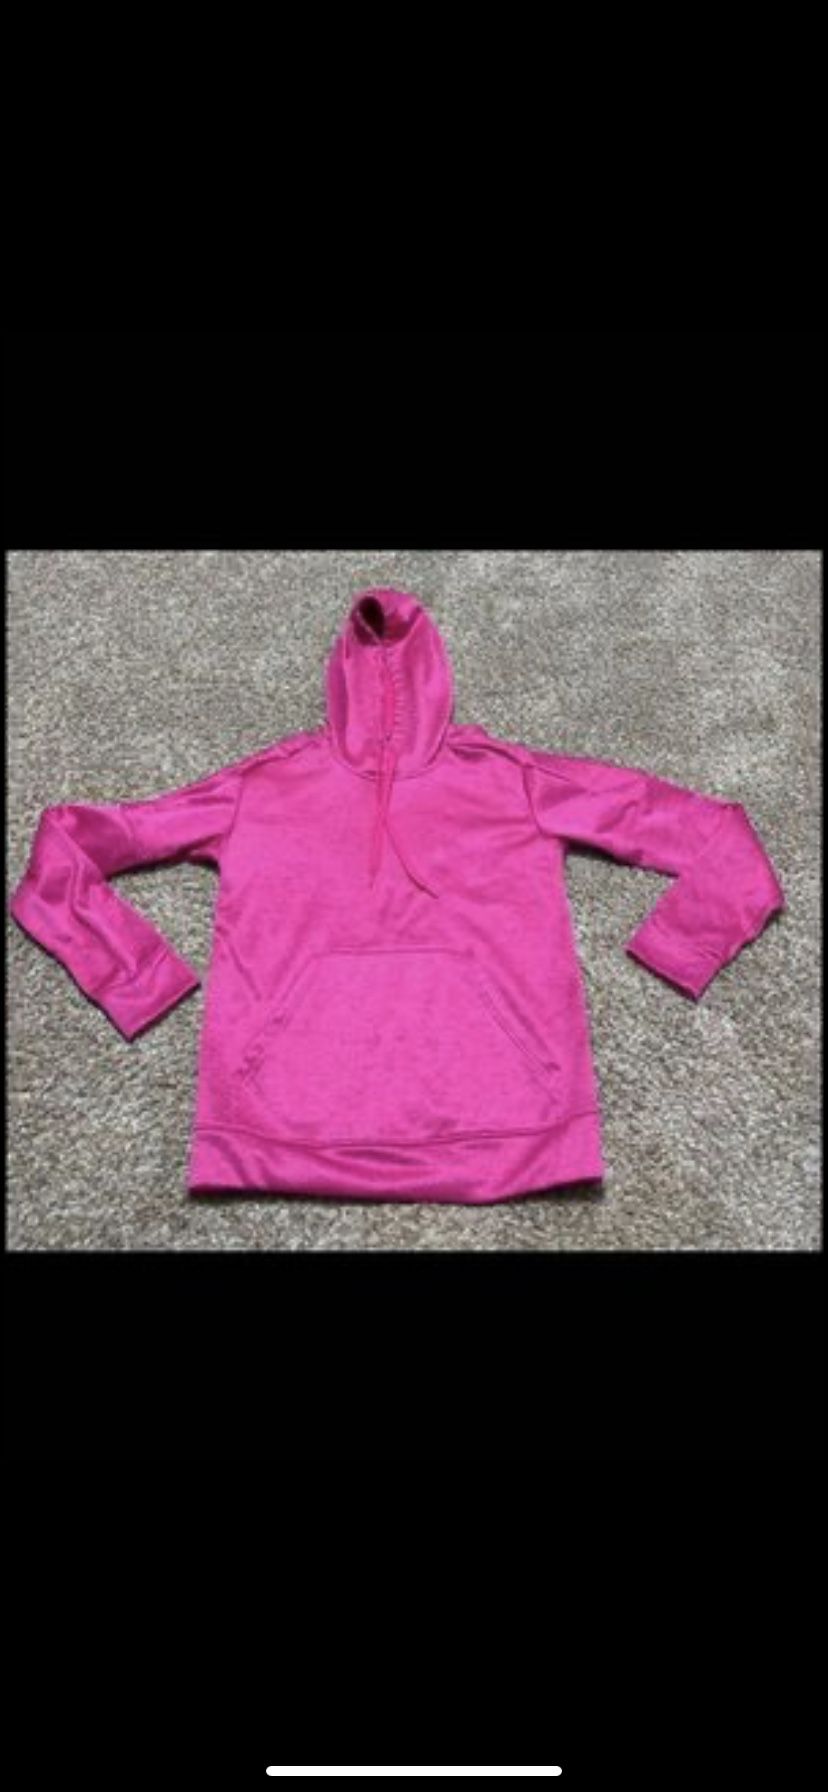 Adidas CLIMAWARM pink hoodie size XS- 12/14